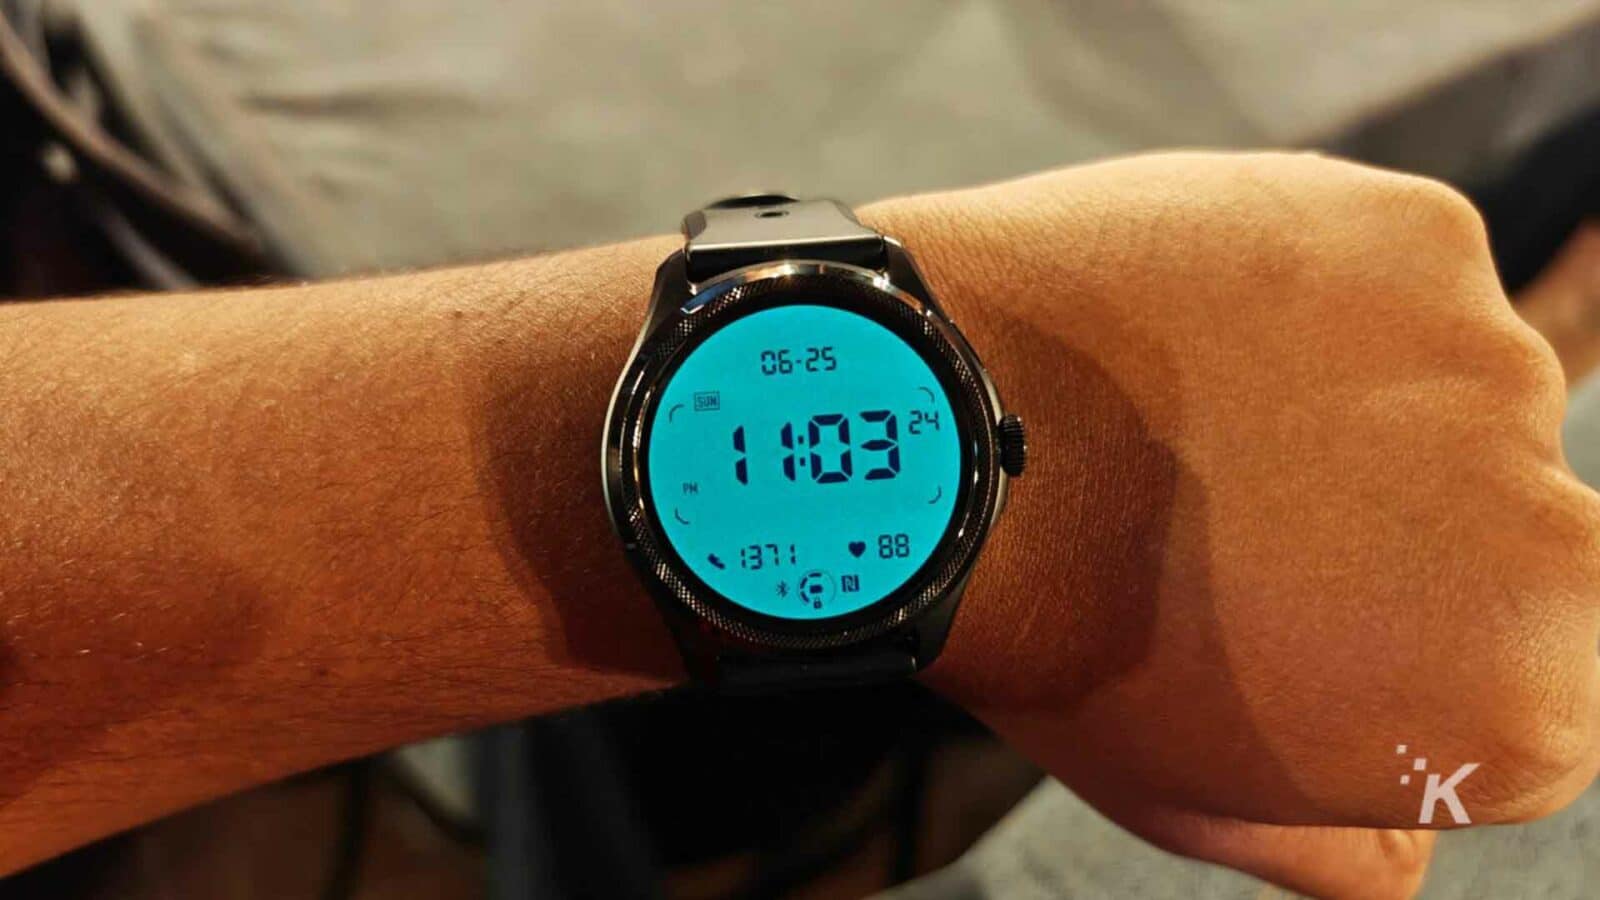 The person is wearing a watch.